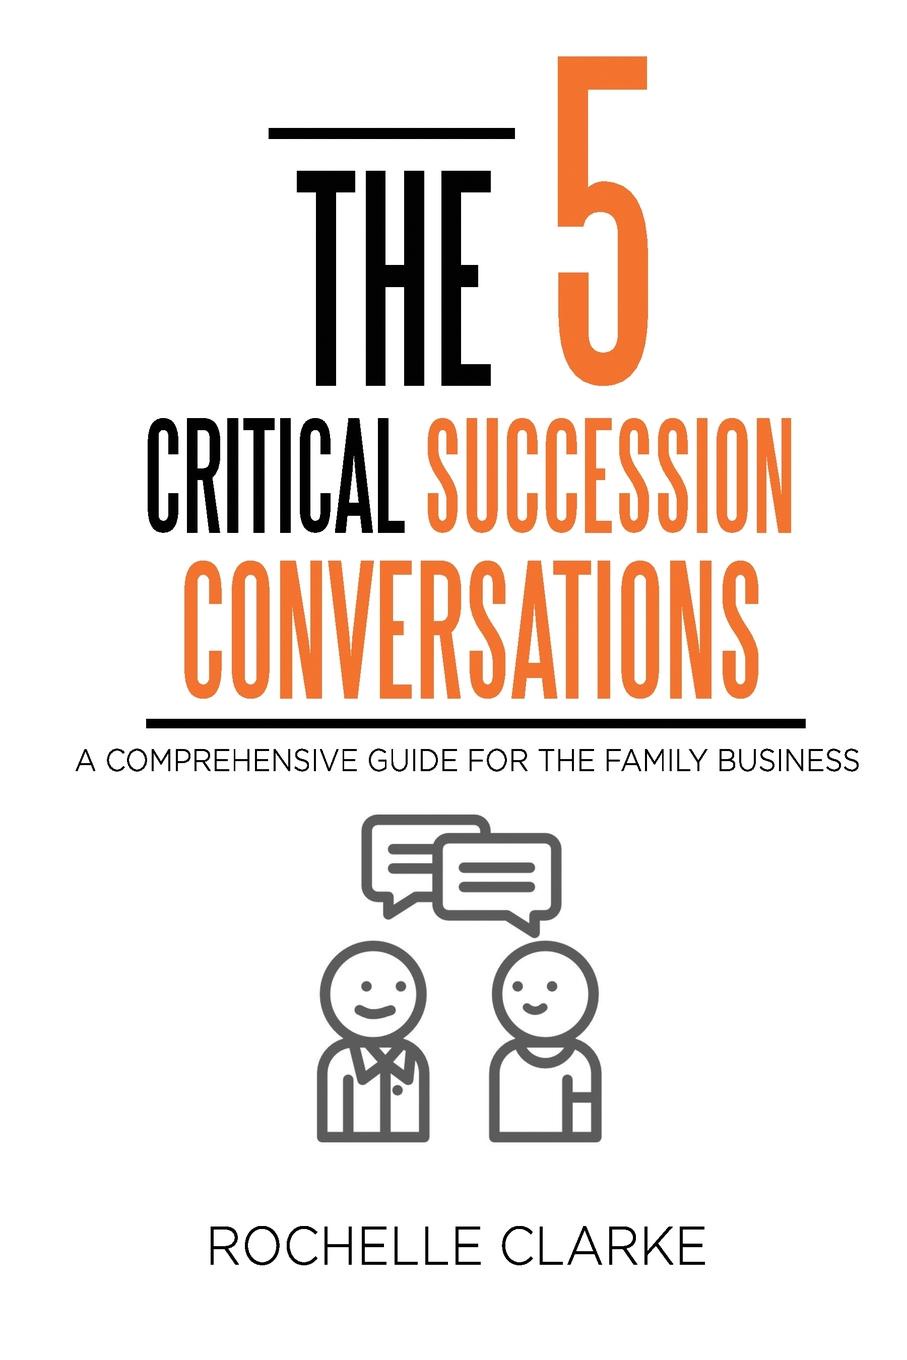 The 5 Critical Succession Conversations. A Comprehensive Guide for the Family Business